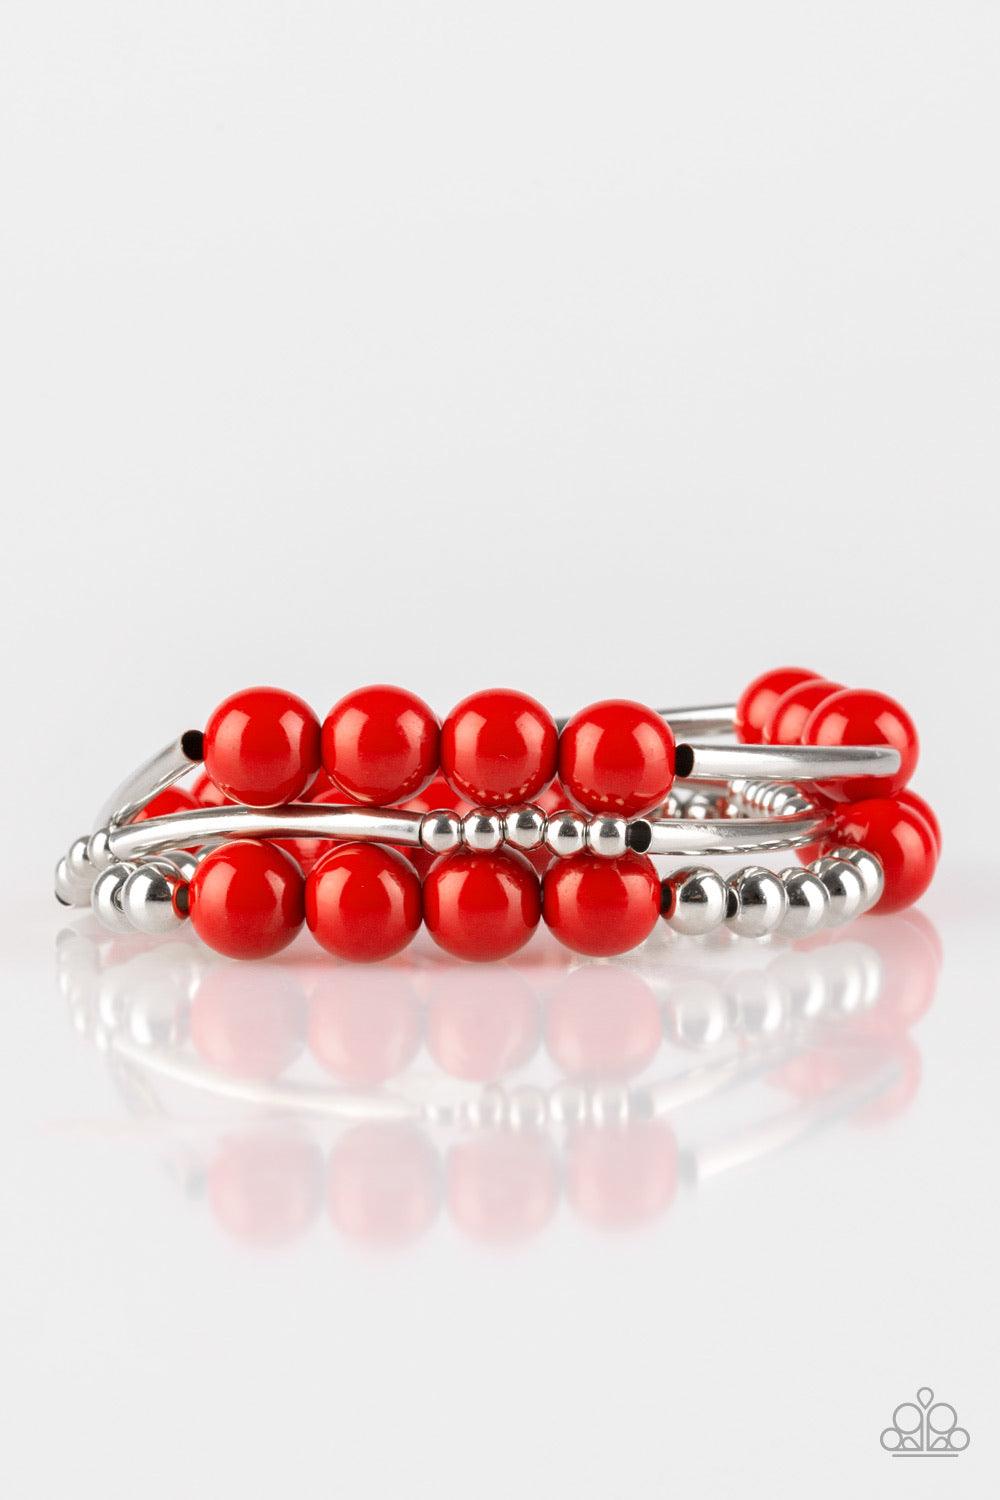 Paparazzi Accessories New Adventures - Red Polished red beads and mismatched silver beads are threaded along stretchy bands, creating colorful layers across the wrist. Jewelry